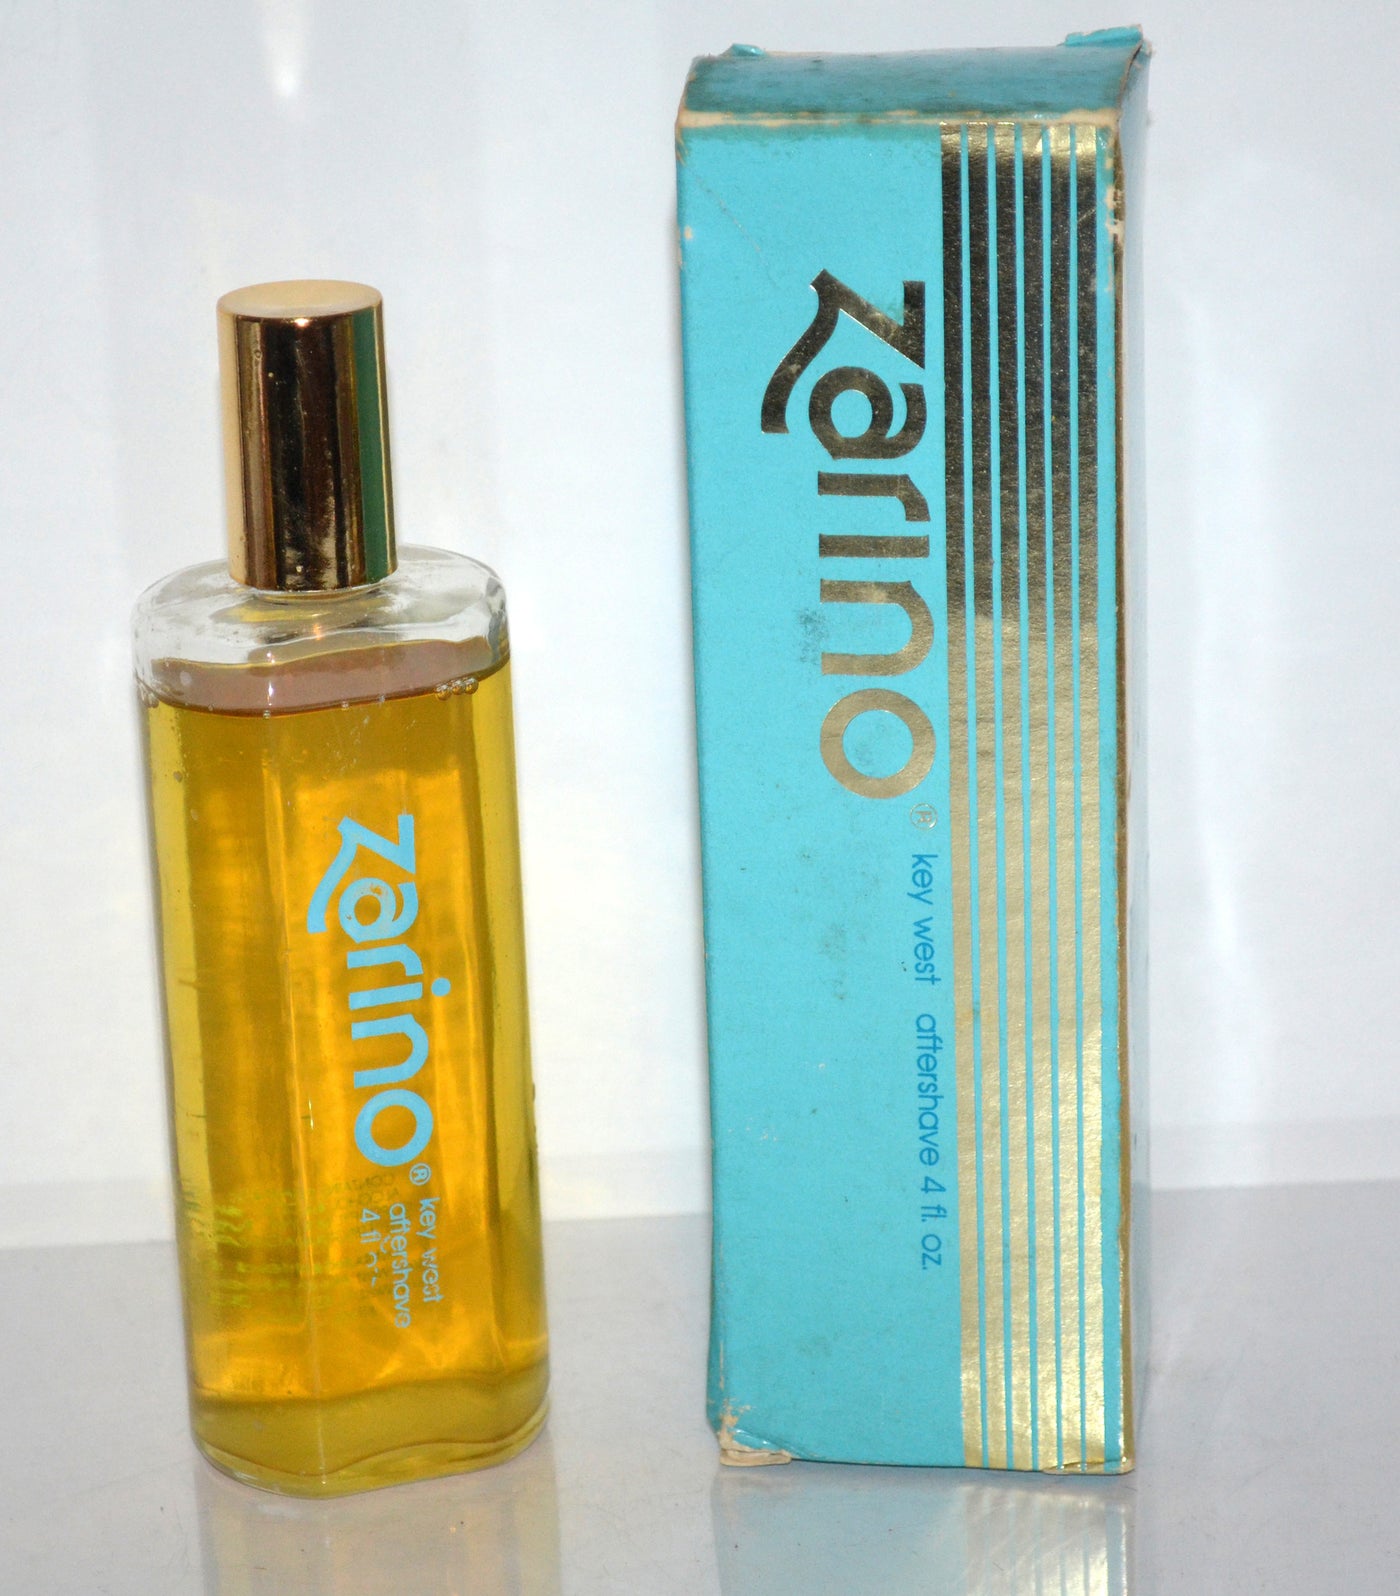 Key West Zarino After Shave